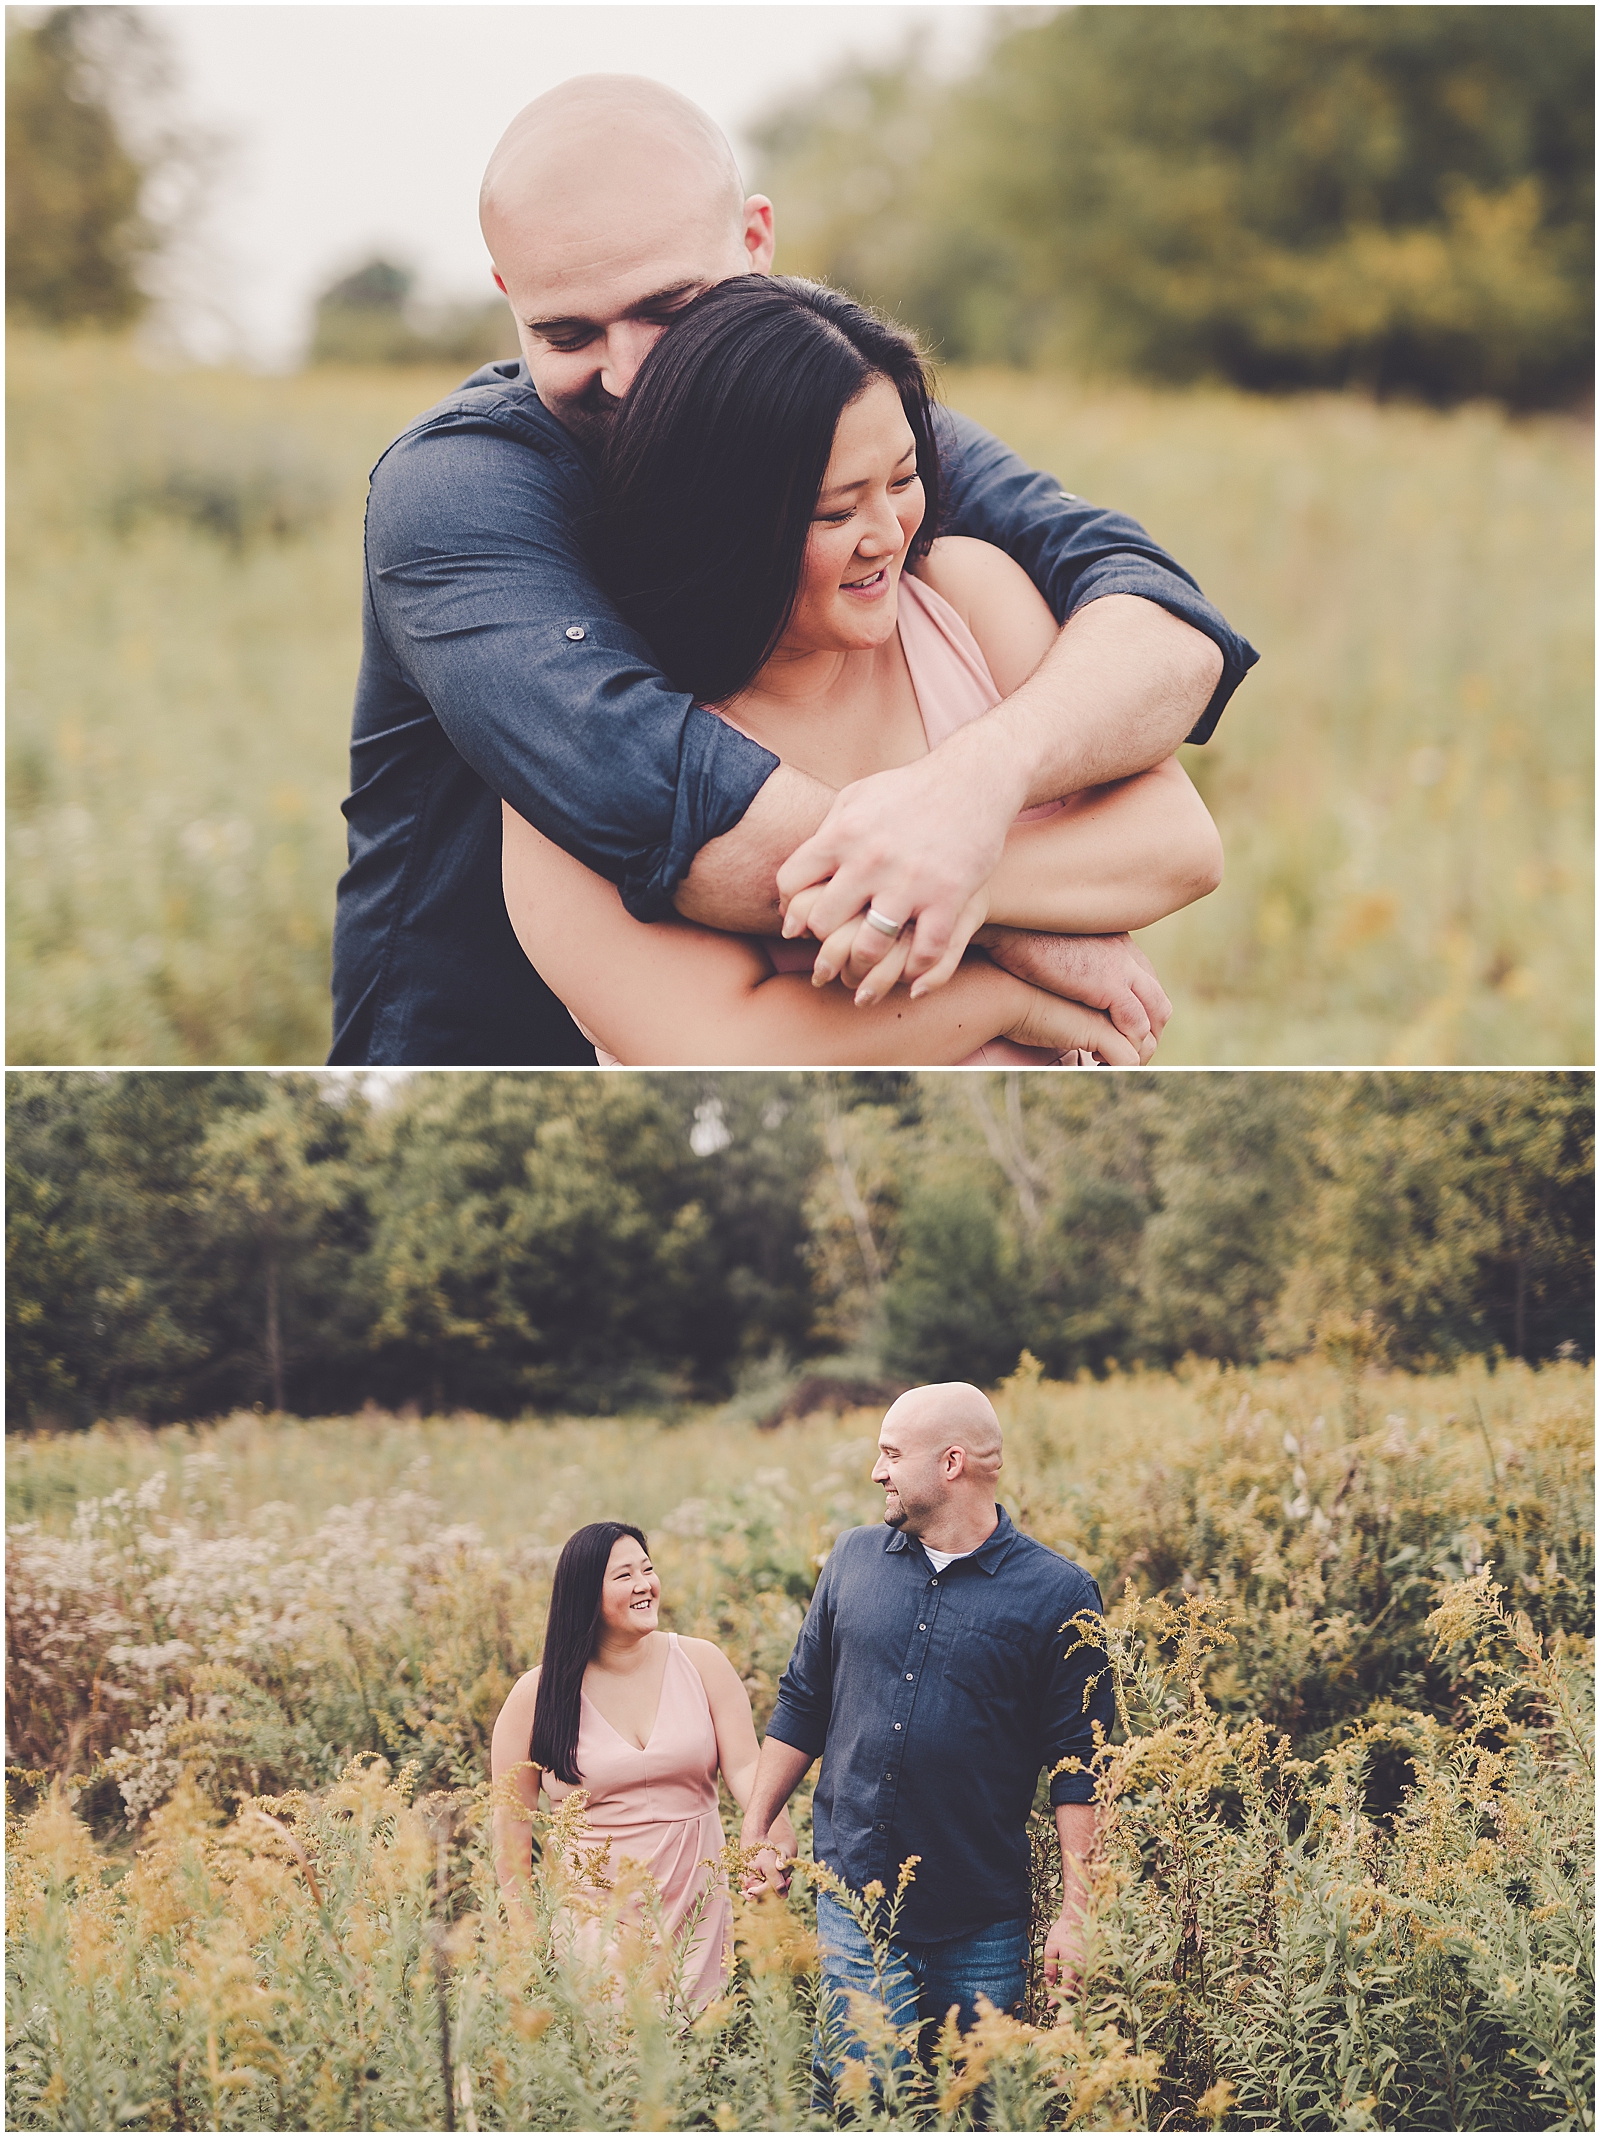 CayLee and Ryan's anniversary session at Perry Farm in Bourbonnais with Chicagoland wedding photographer Kara Evans Photographer. 